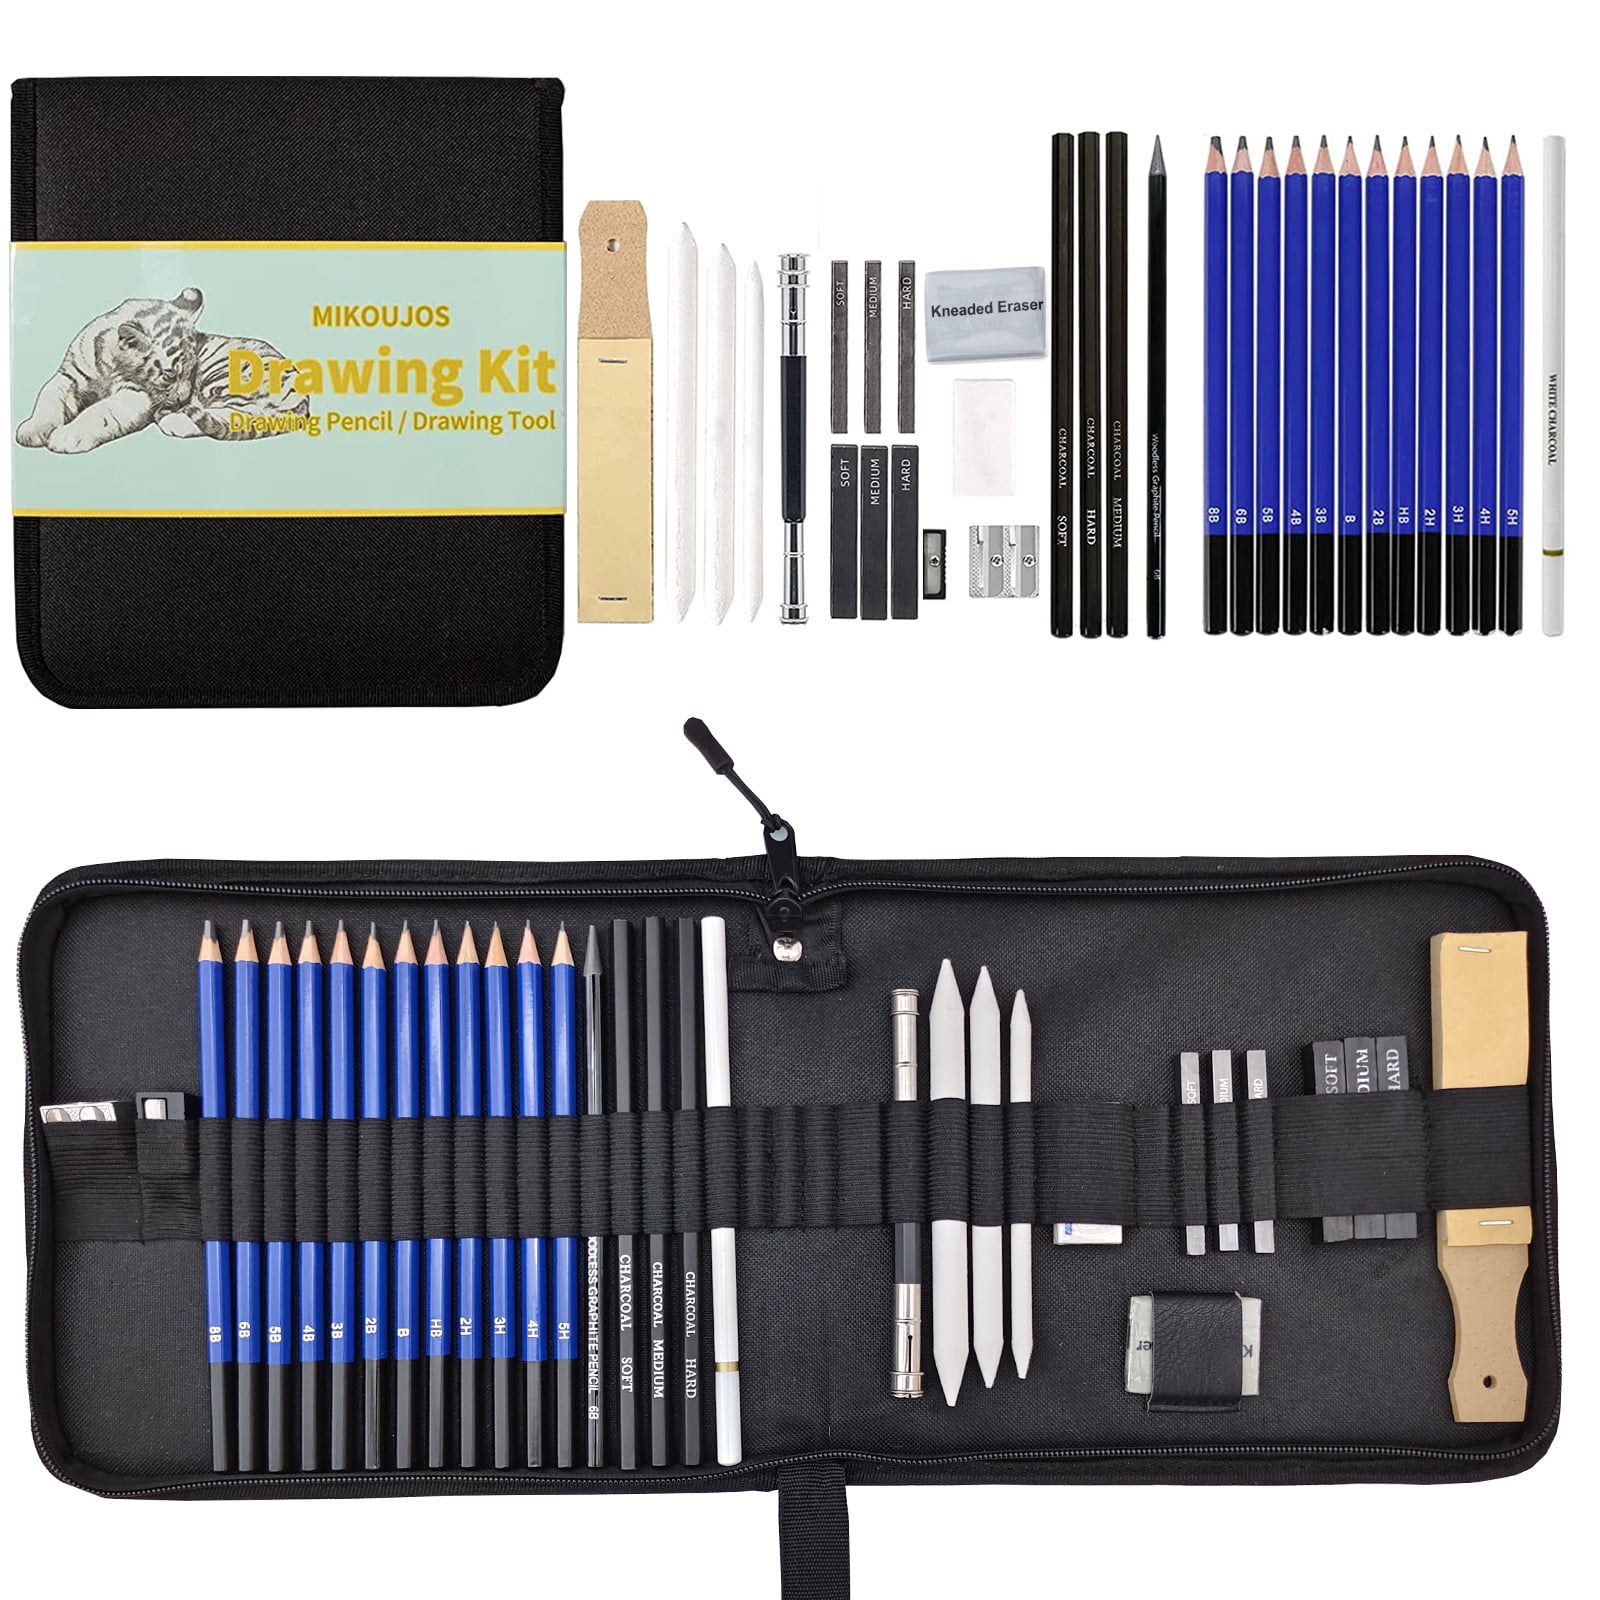 Drawing Set for Kids Ages 8-12 - Drawing Kit with 41pcs of Drawing Supplies  - Sketchbook 9”x12” 100 pages and Portable Drawing Pencil Case - Kids